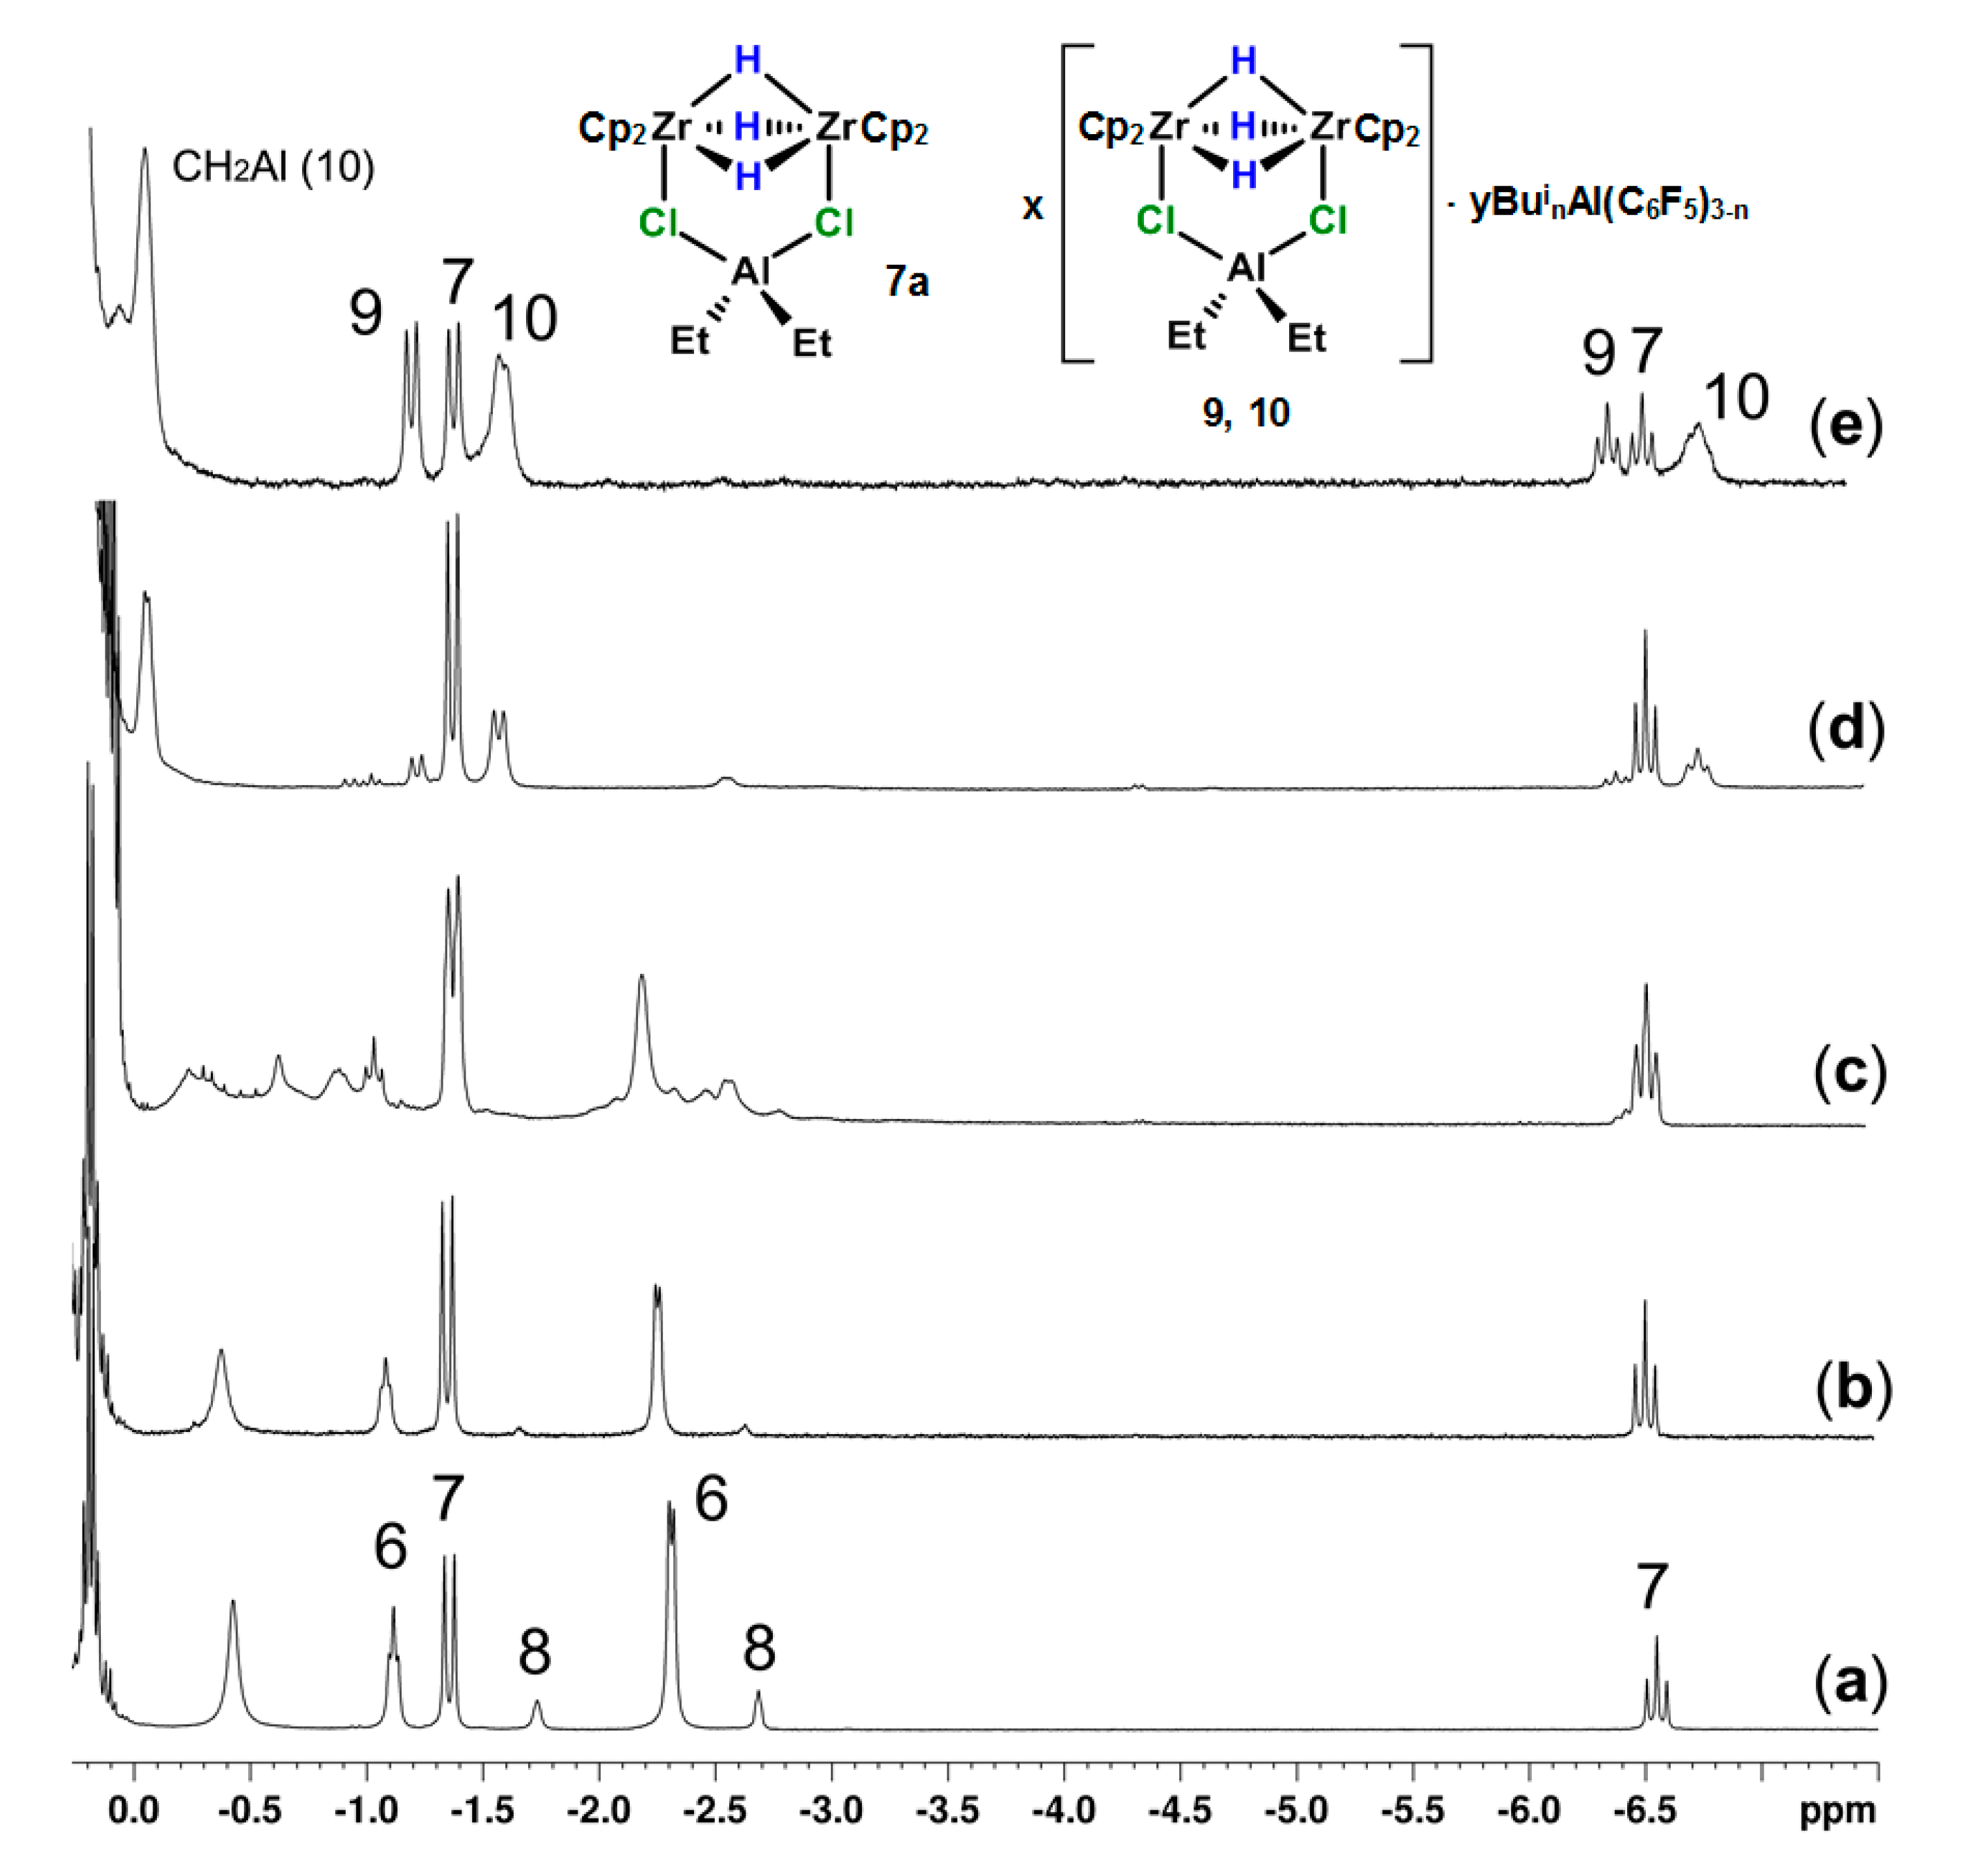 Catalysts Free Full Text Catalytic Systems Based On Cp2zrx2 X Cl H Organoaluminum Compounds And Perfluorophenylboranes Role Of Zr Zr And Zr Al Hydride Intermediates In Alkene Dimerization And Oligomerization Html